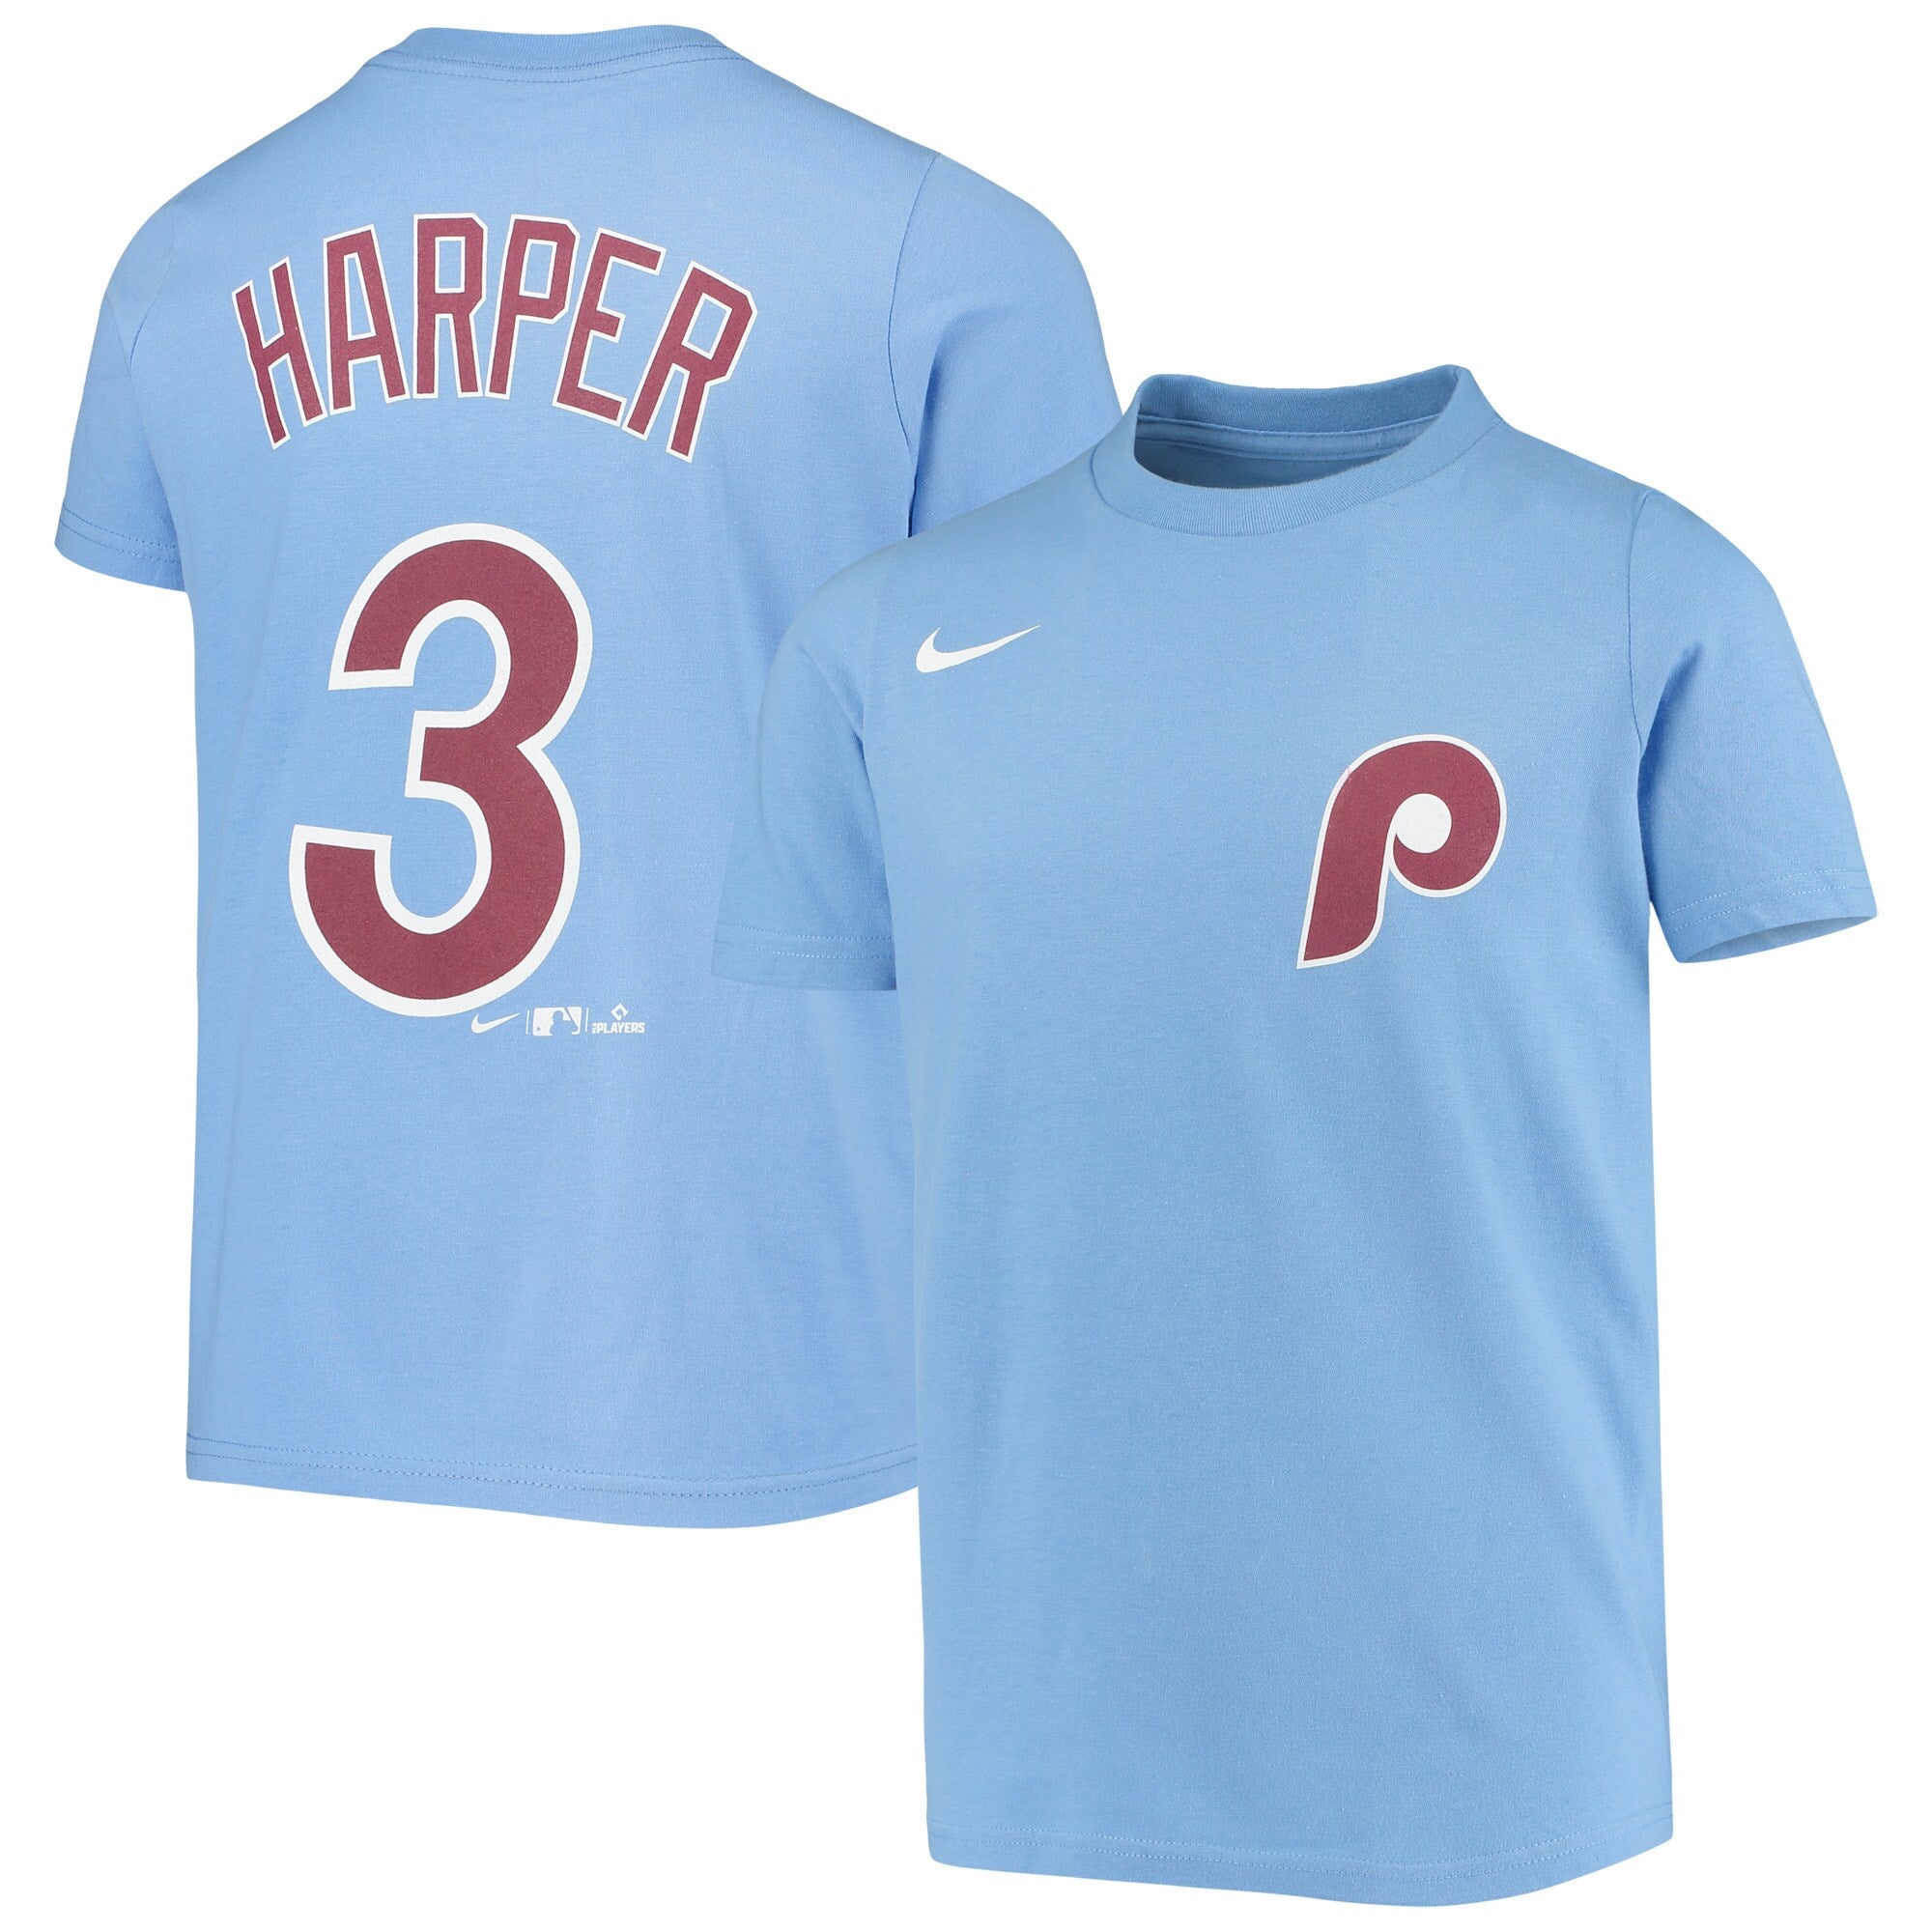 Philadelphia Phillies Nike Official Replica Home Jersey - Mens with Harper  3 printing